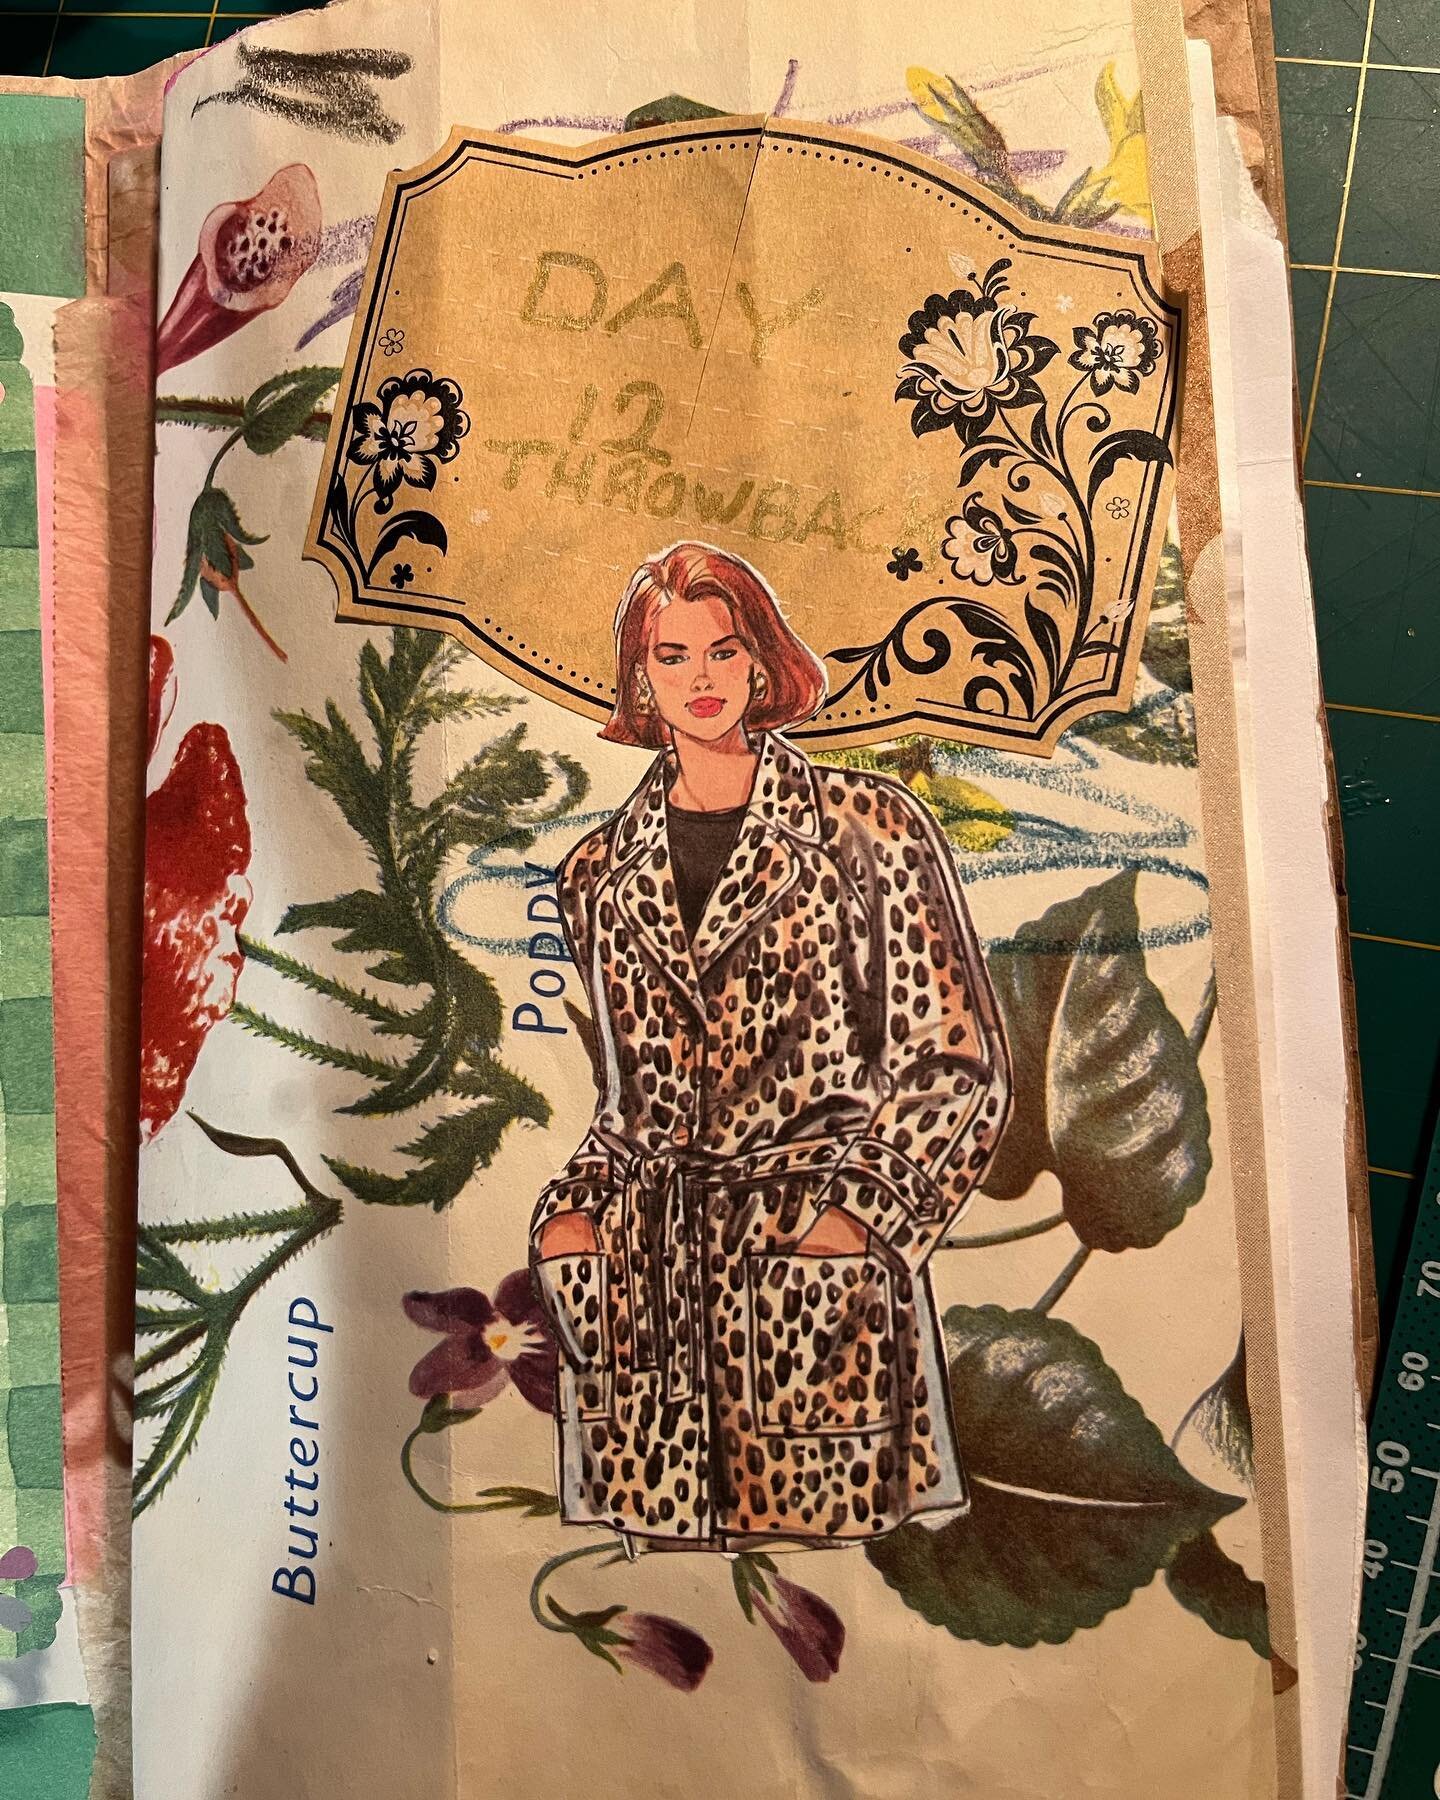 Trying to catch up on #junkjournaljanuary2023. Here are days 12-14. Day 12: throwback. I used some vintage pattern paper, a photo of my husband and I from a great day a few years back, a book page from a childhood book from my mom, and some lyrics fr